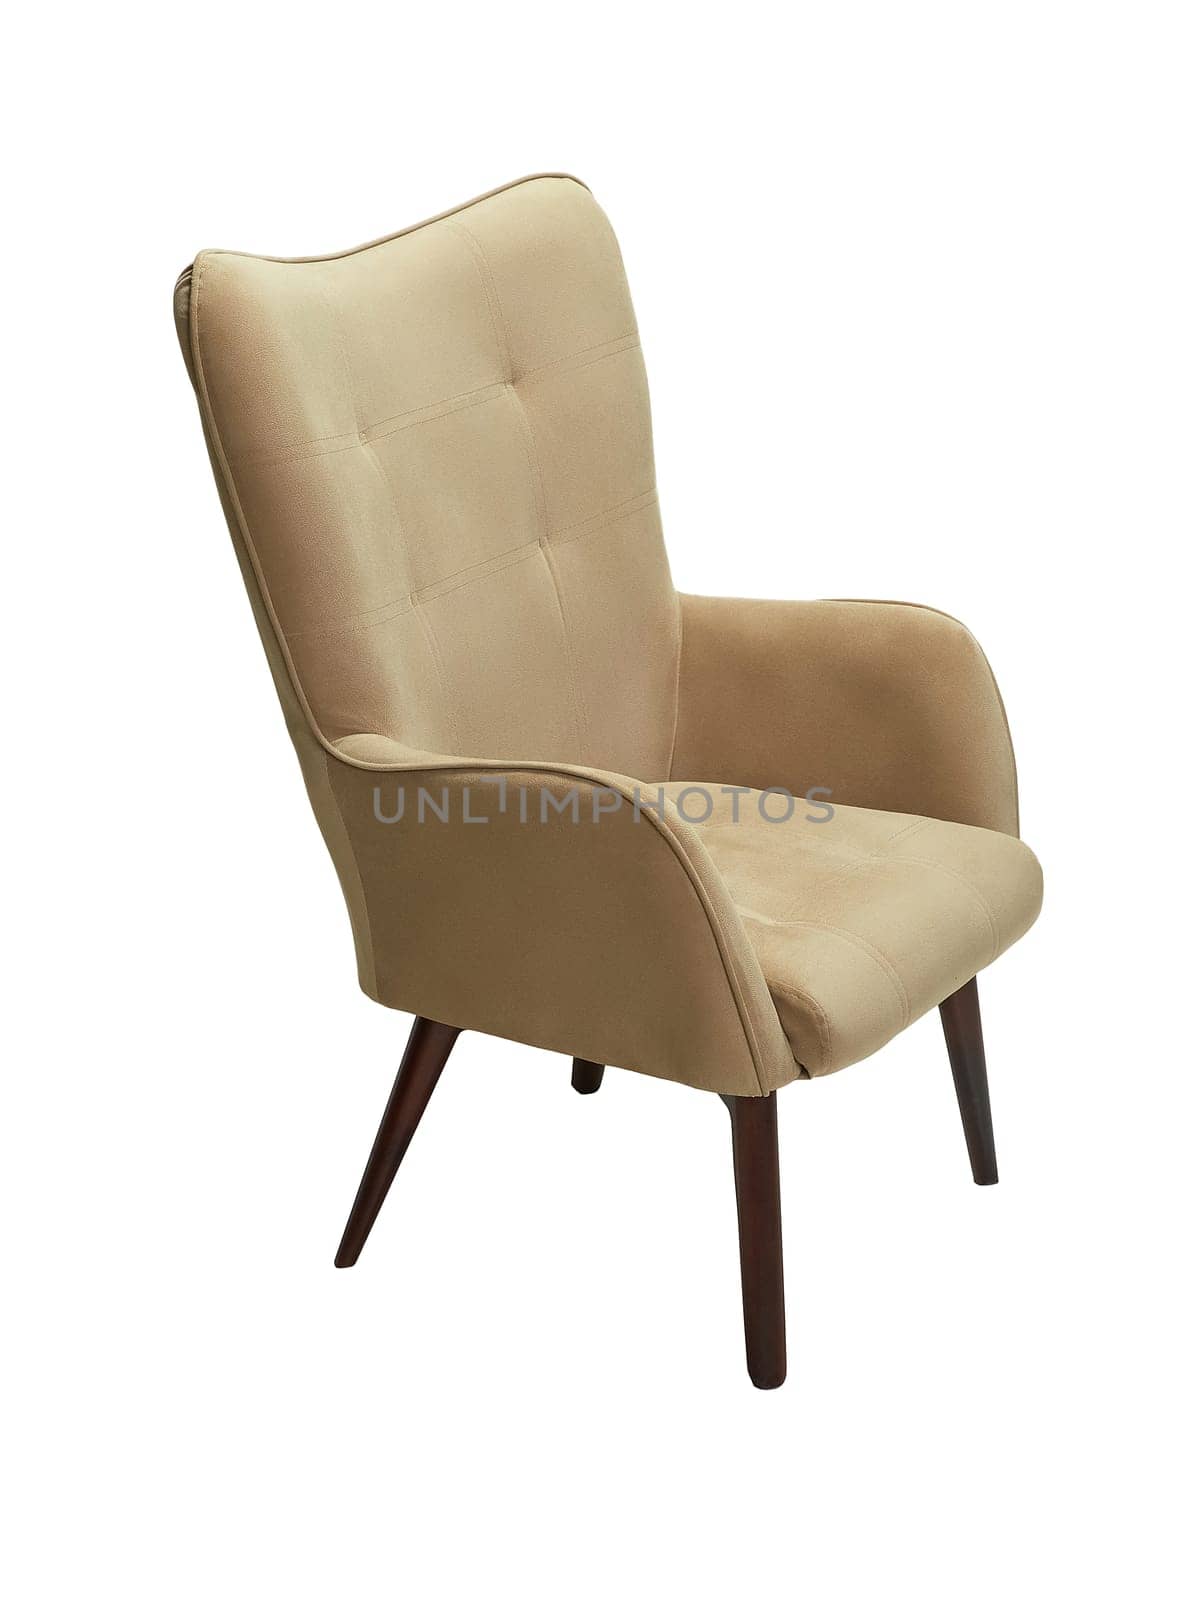 modern beige fabric armchair with wooden legs isolated on white background, side view by artemzatsepilin